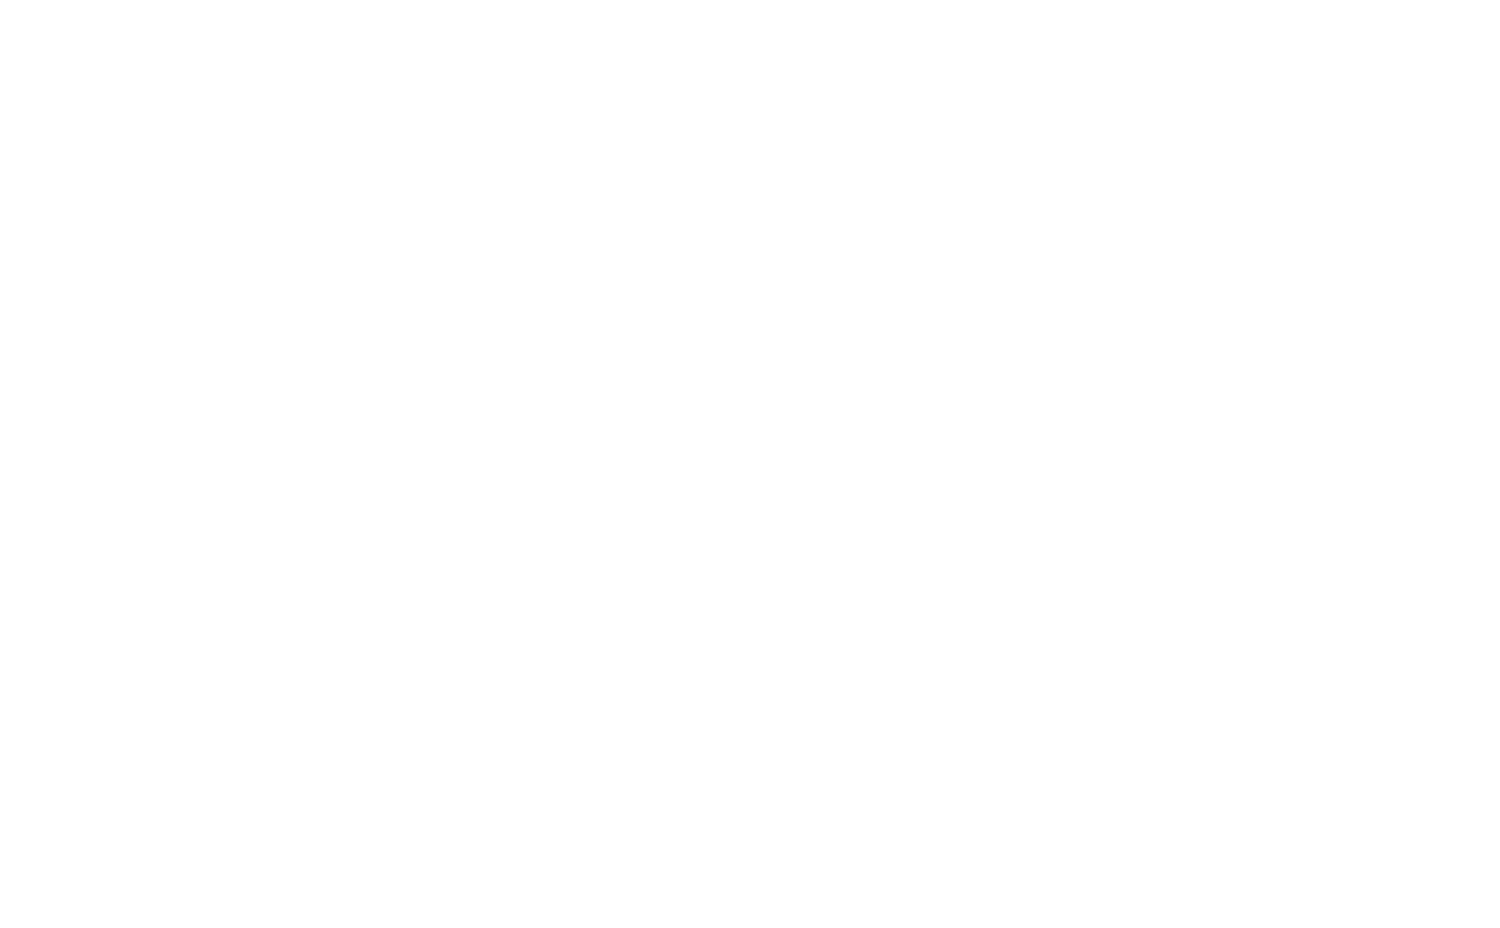 DC Foreclosure Solutions